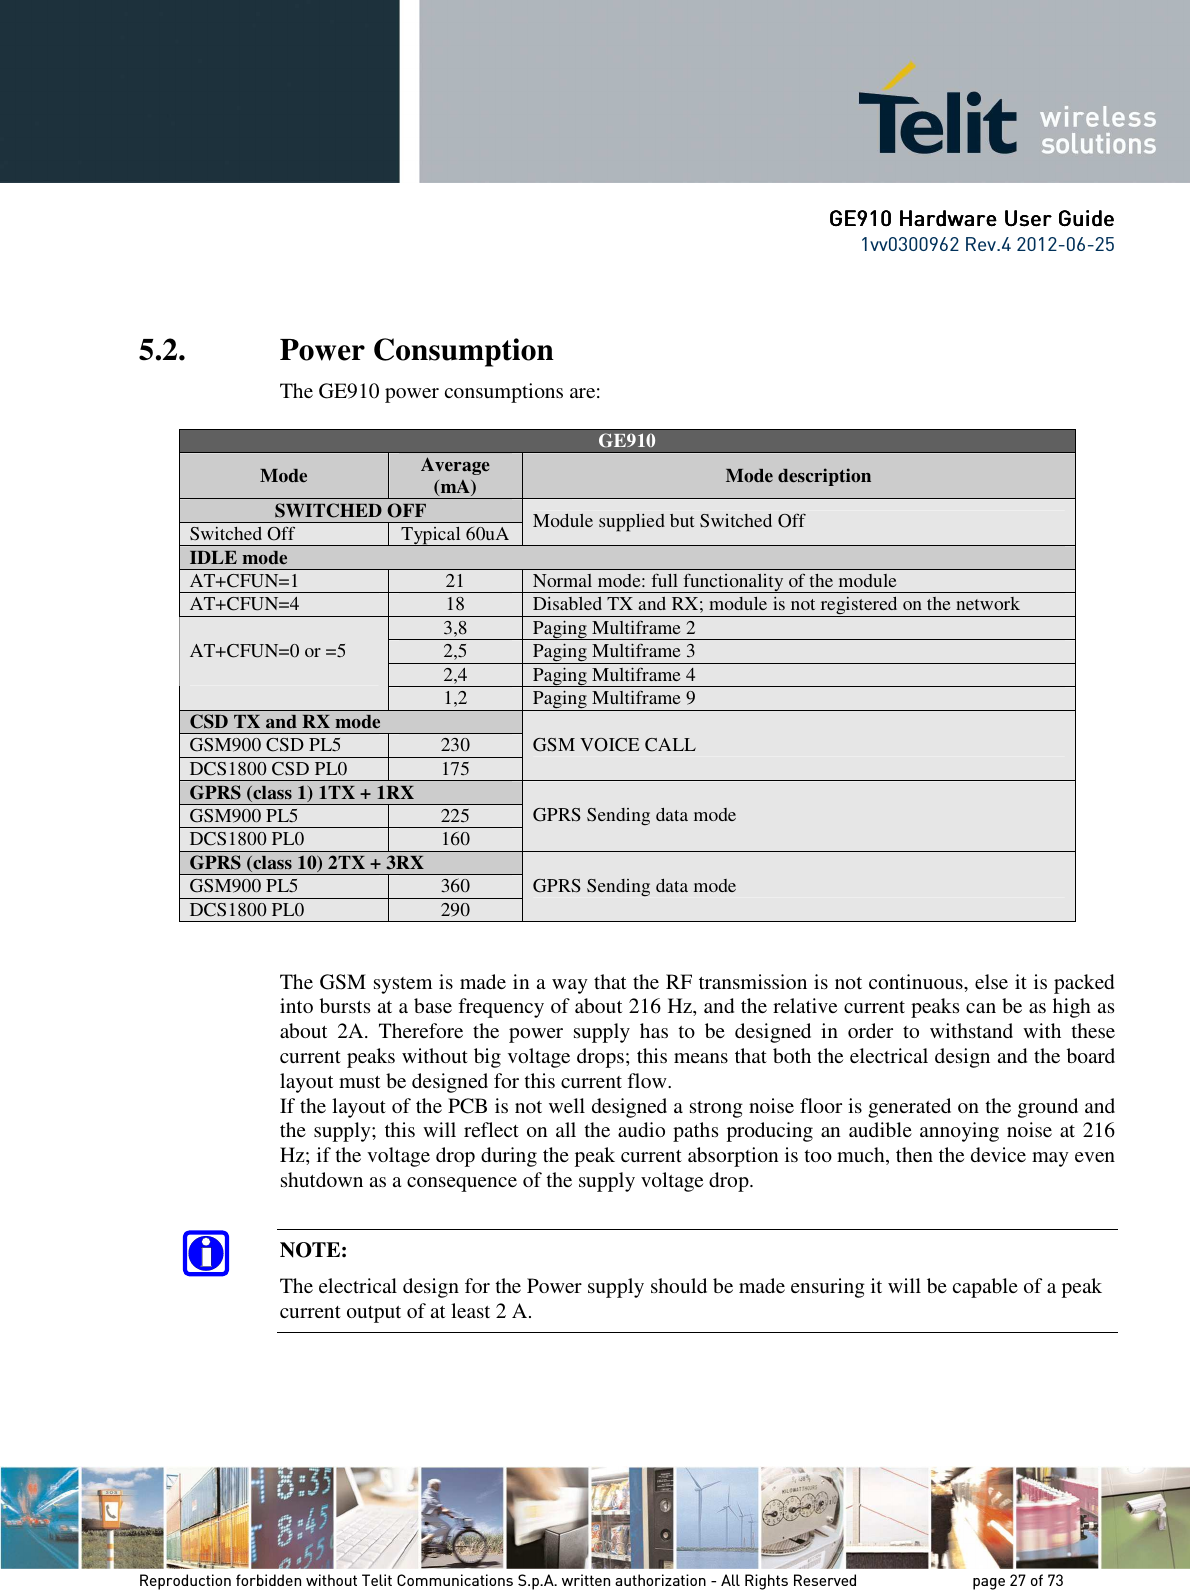      GE9GE9GE9GE910 Hardware User Guide10 Hardware User Guide10 Hardware User Guide10 Hardware User Guide    1vv0300962 Rev.4 2012-06-25    Reproduction forbidden without Telit Communications S.p.A. written authorization - All Rights Reserved    page 27 of 73 Mod. 0805 2011-07 Rev.2  5.2. Power Consumption The GE910 power consumptions are:   GE910 Mode  Average (mA)  Mode description SWITCHED OFF Switched Off  Typical 60uA  Module supplied but Switched Off IDLE mode                              AT+CFUN=1  21  Normal mode: full functionality of the module AT+CFUN=4  18 Disabled TX and RX; module is not registered on the network 3,8 Paging Multiframe 2 2,5 Paging Multiframe 3 2,4 Paging Multiframe 4 AT+CFUN=0 or =5  1,2 Paging Multiframe 9 CSD TX and RX mode GSM900 CSD PL5  230 DCS1800 CSD PL0  175 GSM VOICE CALL GPRS (class 1) 1TX + 1RX GSM900 PL5  225 DCS1800 PL0  160 GPRS Sending data mode GPRS (class 10) 2TX + 3RX GSM900 PL5  360 DCS1800 PL0  290 GPRS Sending data mode   The GSM system is made in a way that the RF transmission is not continuous, else it is packed into bursts at a base frequency of about 216 Hz, and the relative current peaks can be as high as about  2A.  Therefore  the  power  supply  has  to  be  designed  in  order  to  withstand  with  these current peaks without big voltage drops; this means that both the electrical design and the board layout must be designed for this current flow. If the layout of the PCB is not well designed a strong noise floor is generated on the ground and the supply; this will reflect on all the audio paths producing an audible annoying noise at 216 Hz; if the voltage drop during the peak current absorption is too much, then the device may even shutdown as a consequence of the supply voltage drop.  NOTE: The electrical design for the Power supply should be made ensuring it will be capable of a peak current output of at least 2 A.  